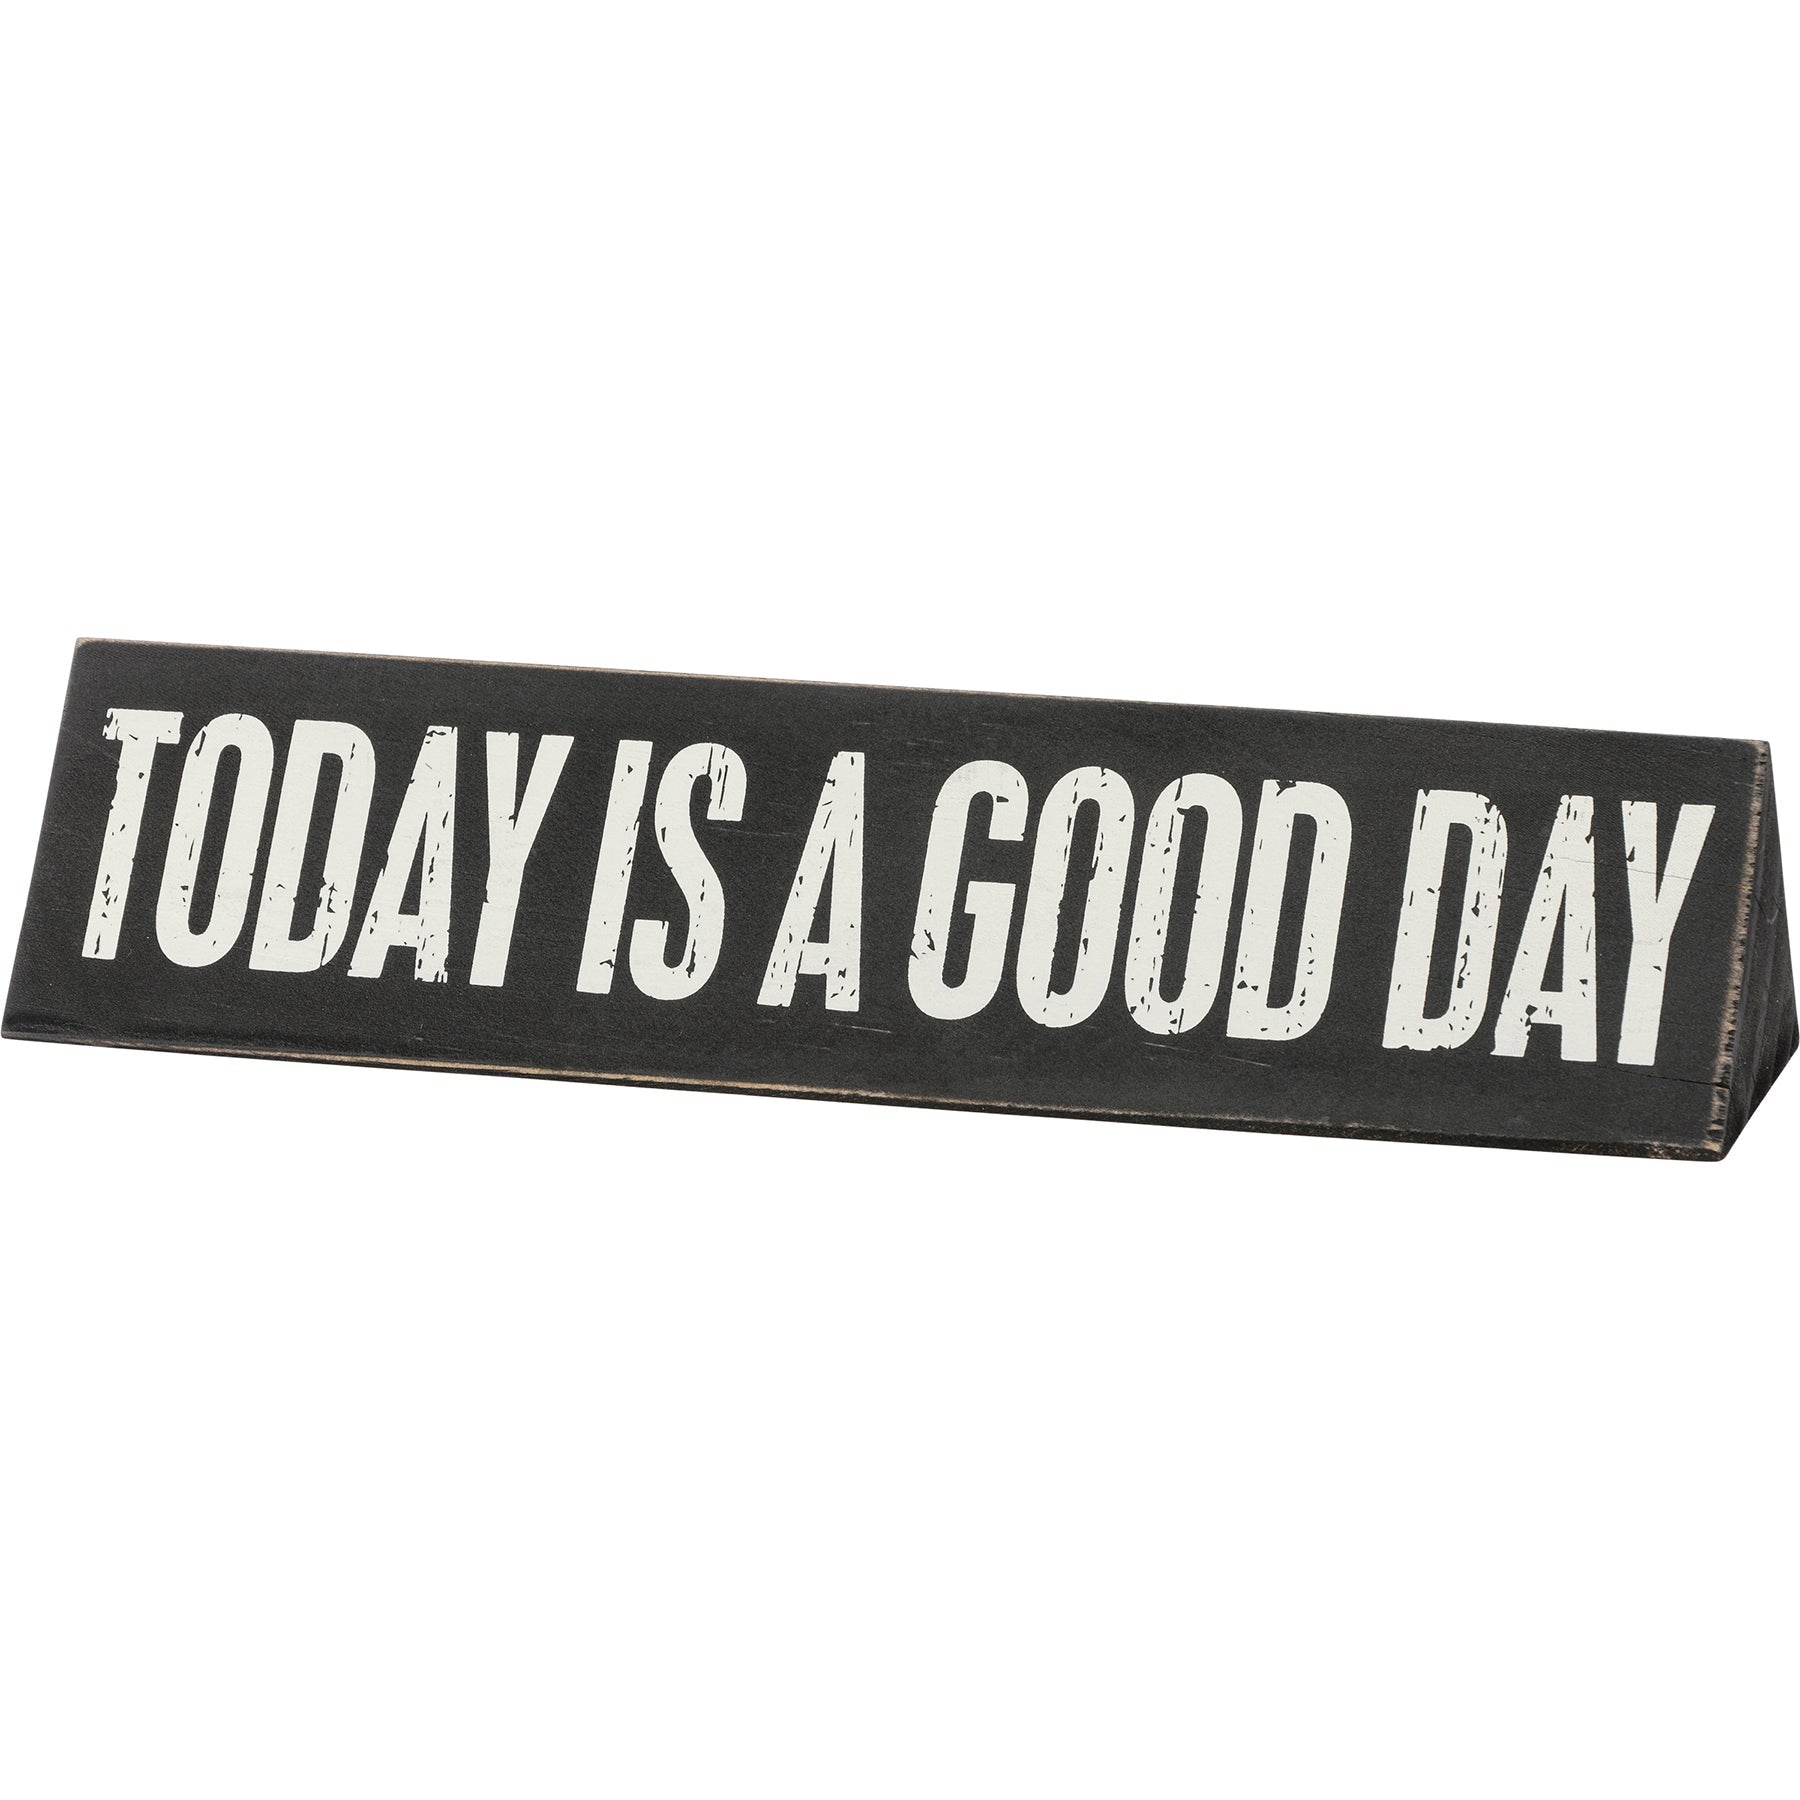 Nope Not Today / Today Is A Good Day Reversible Wooden Desk Plate